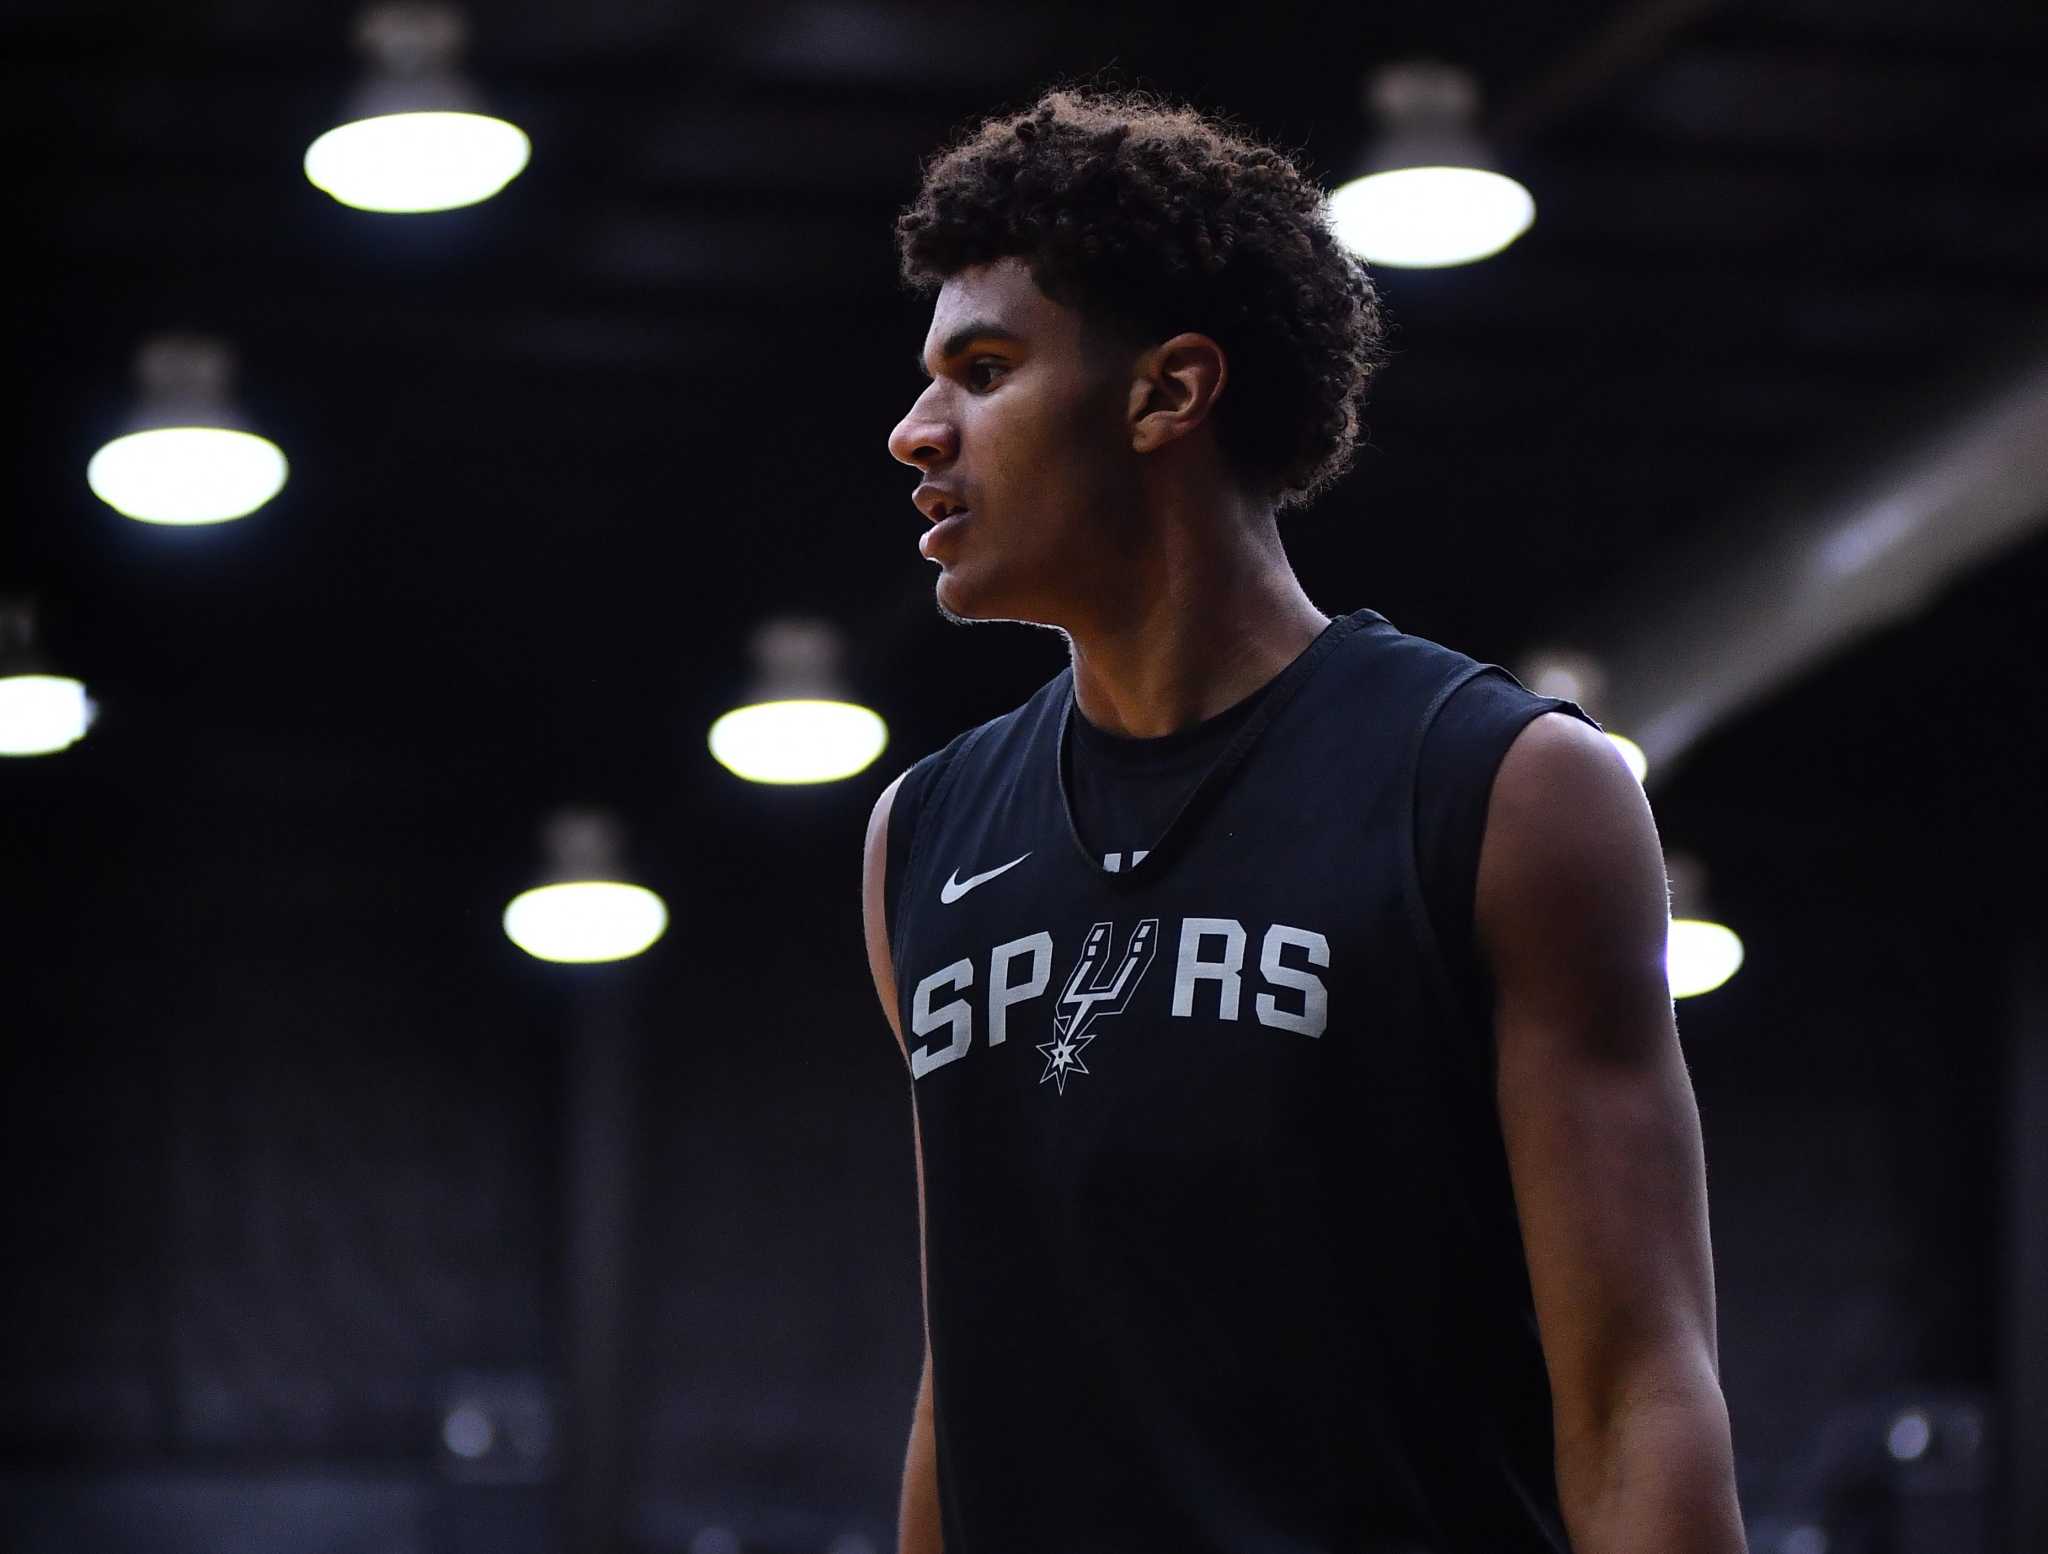 Dominick Barlow paces Spurs in rout of Mavericks